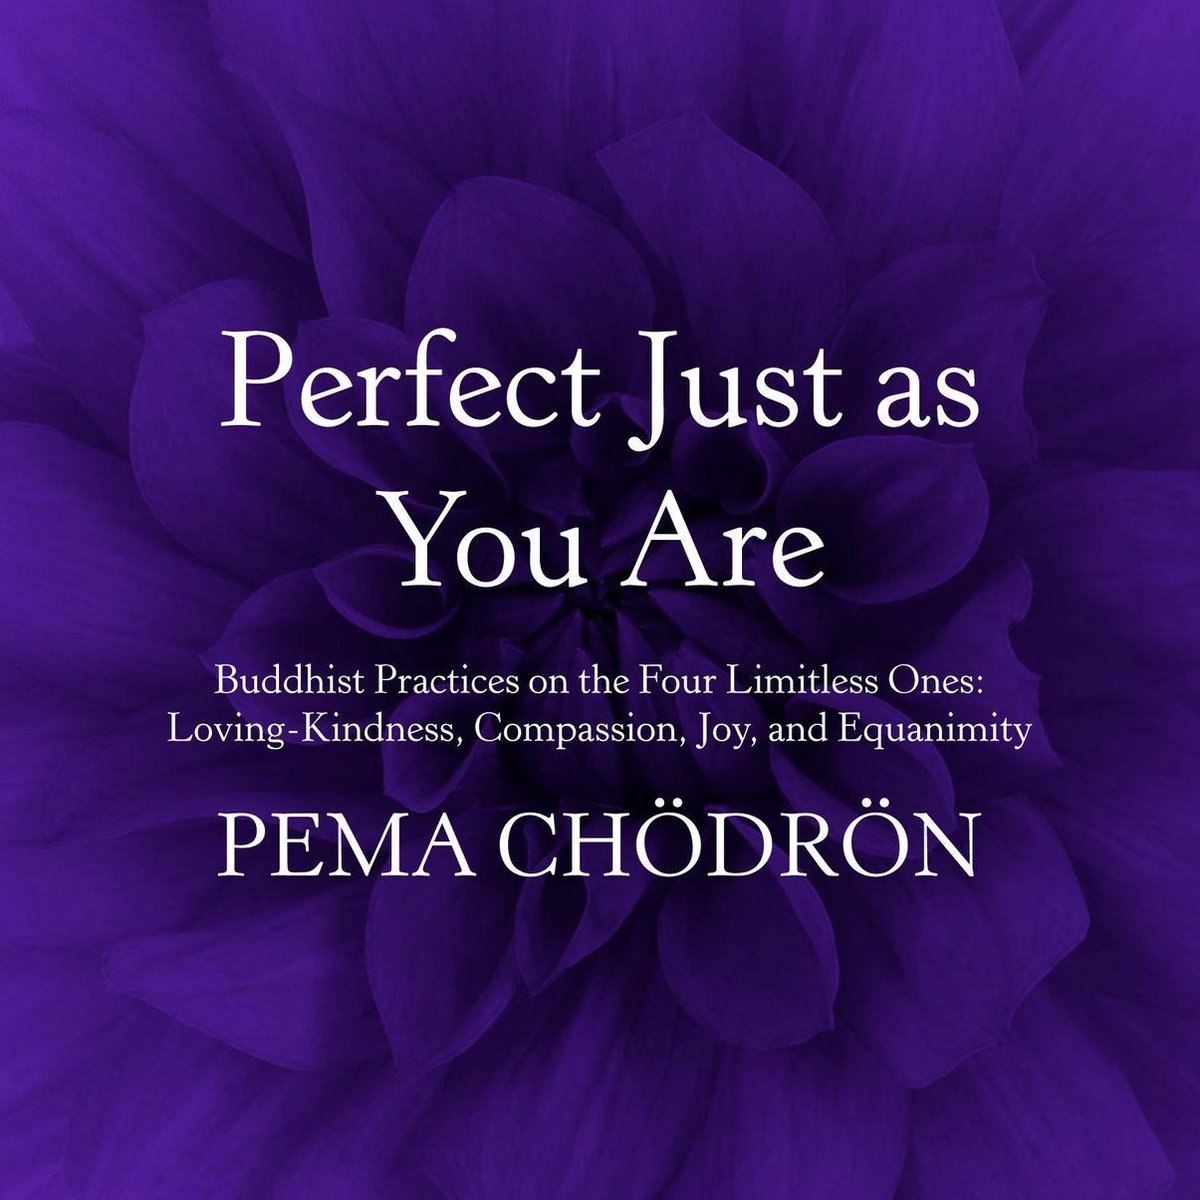 Perfect Just as You Are - Pema Chodron